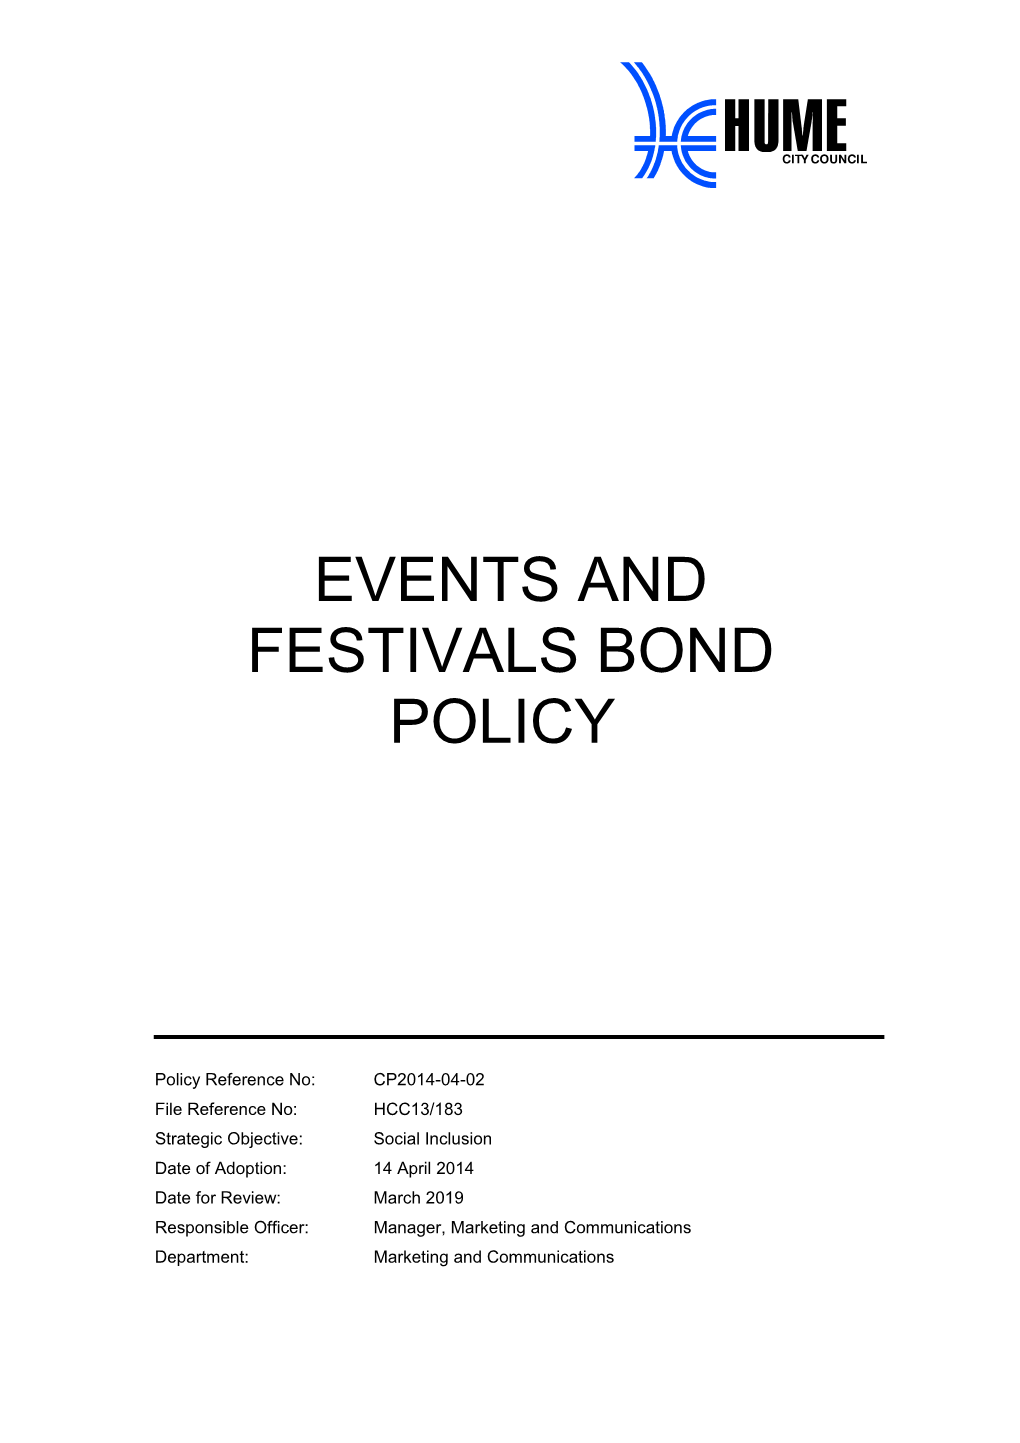 Events and Festivals Bond Policy